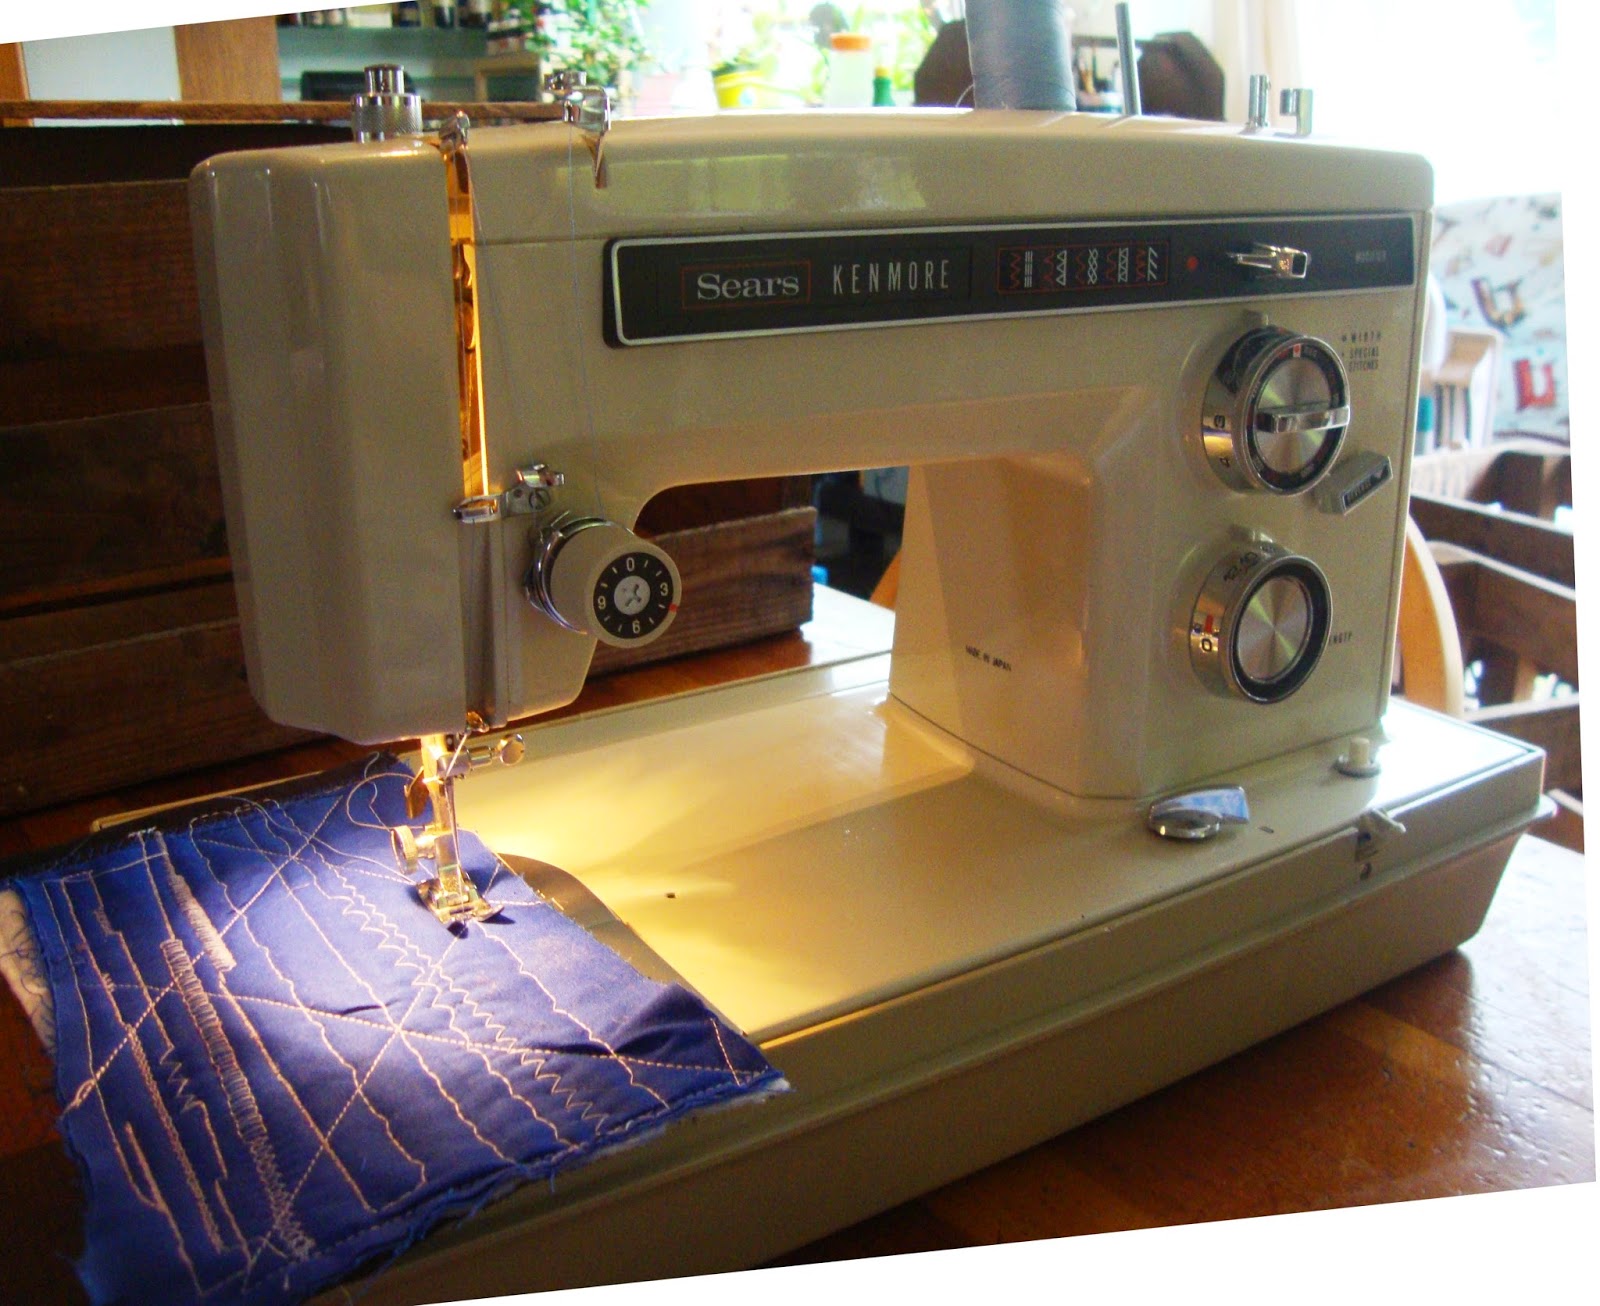 Modern Day Laura: For Sale: Sears Kenmore Model 1431 Sewing Machine